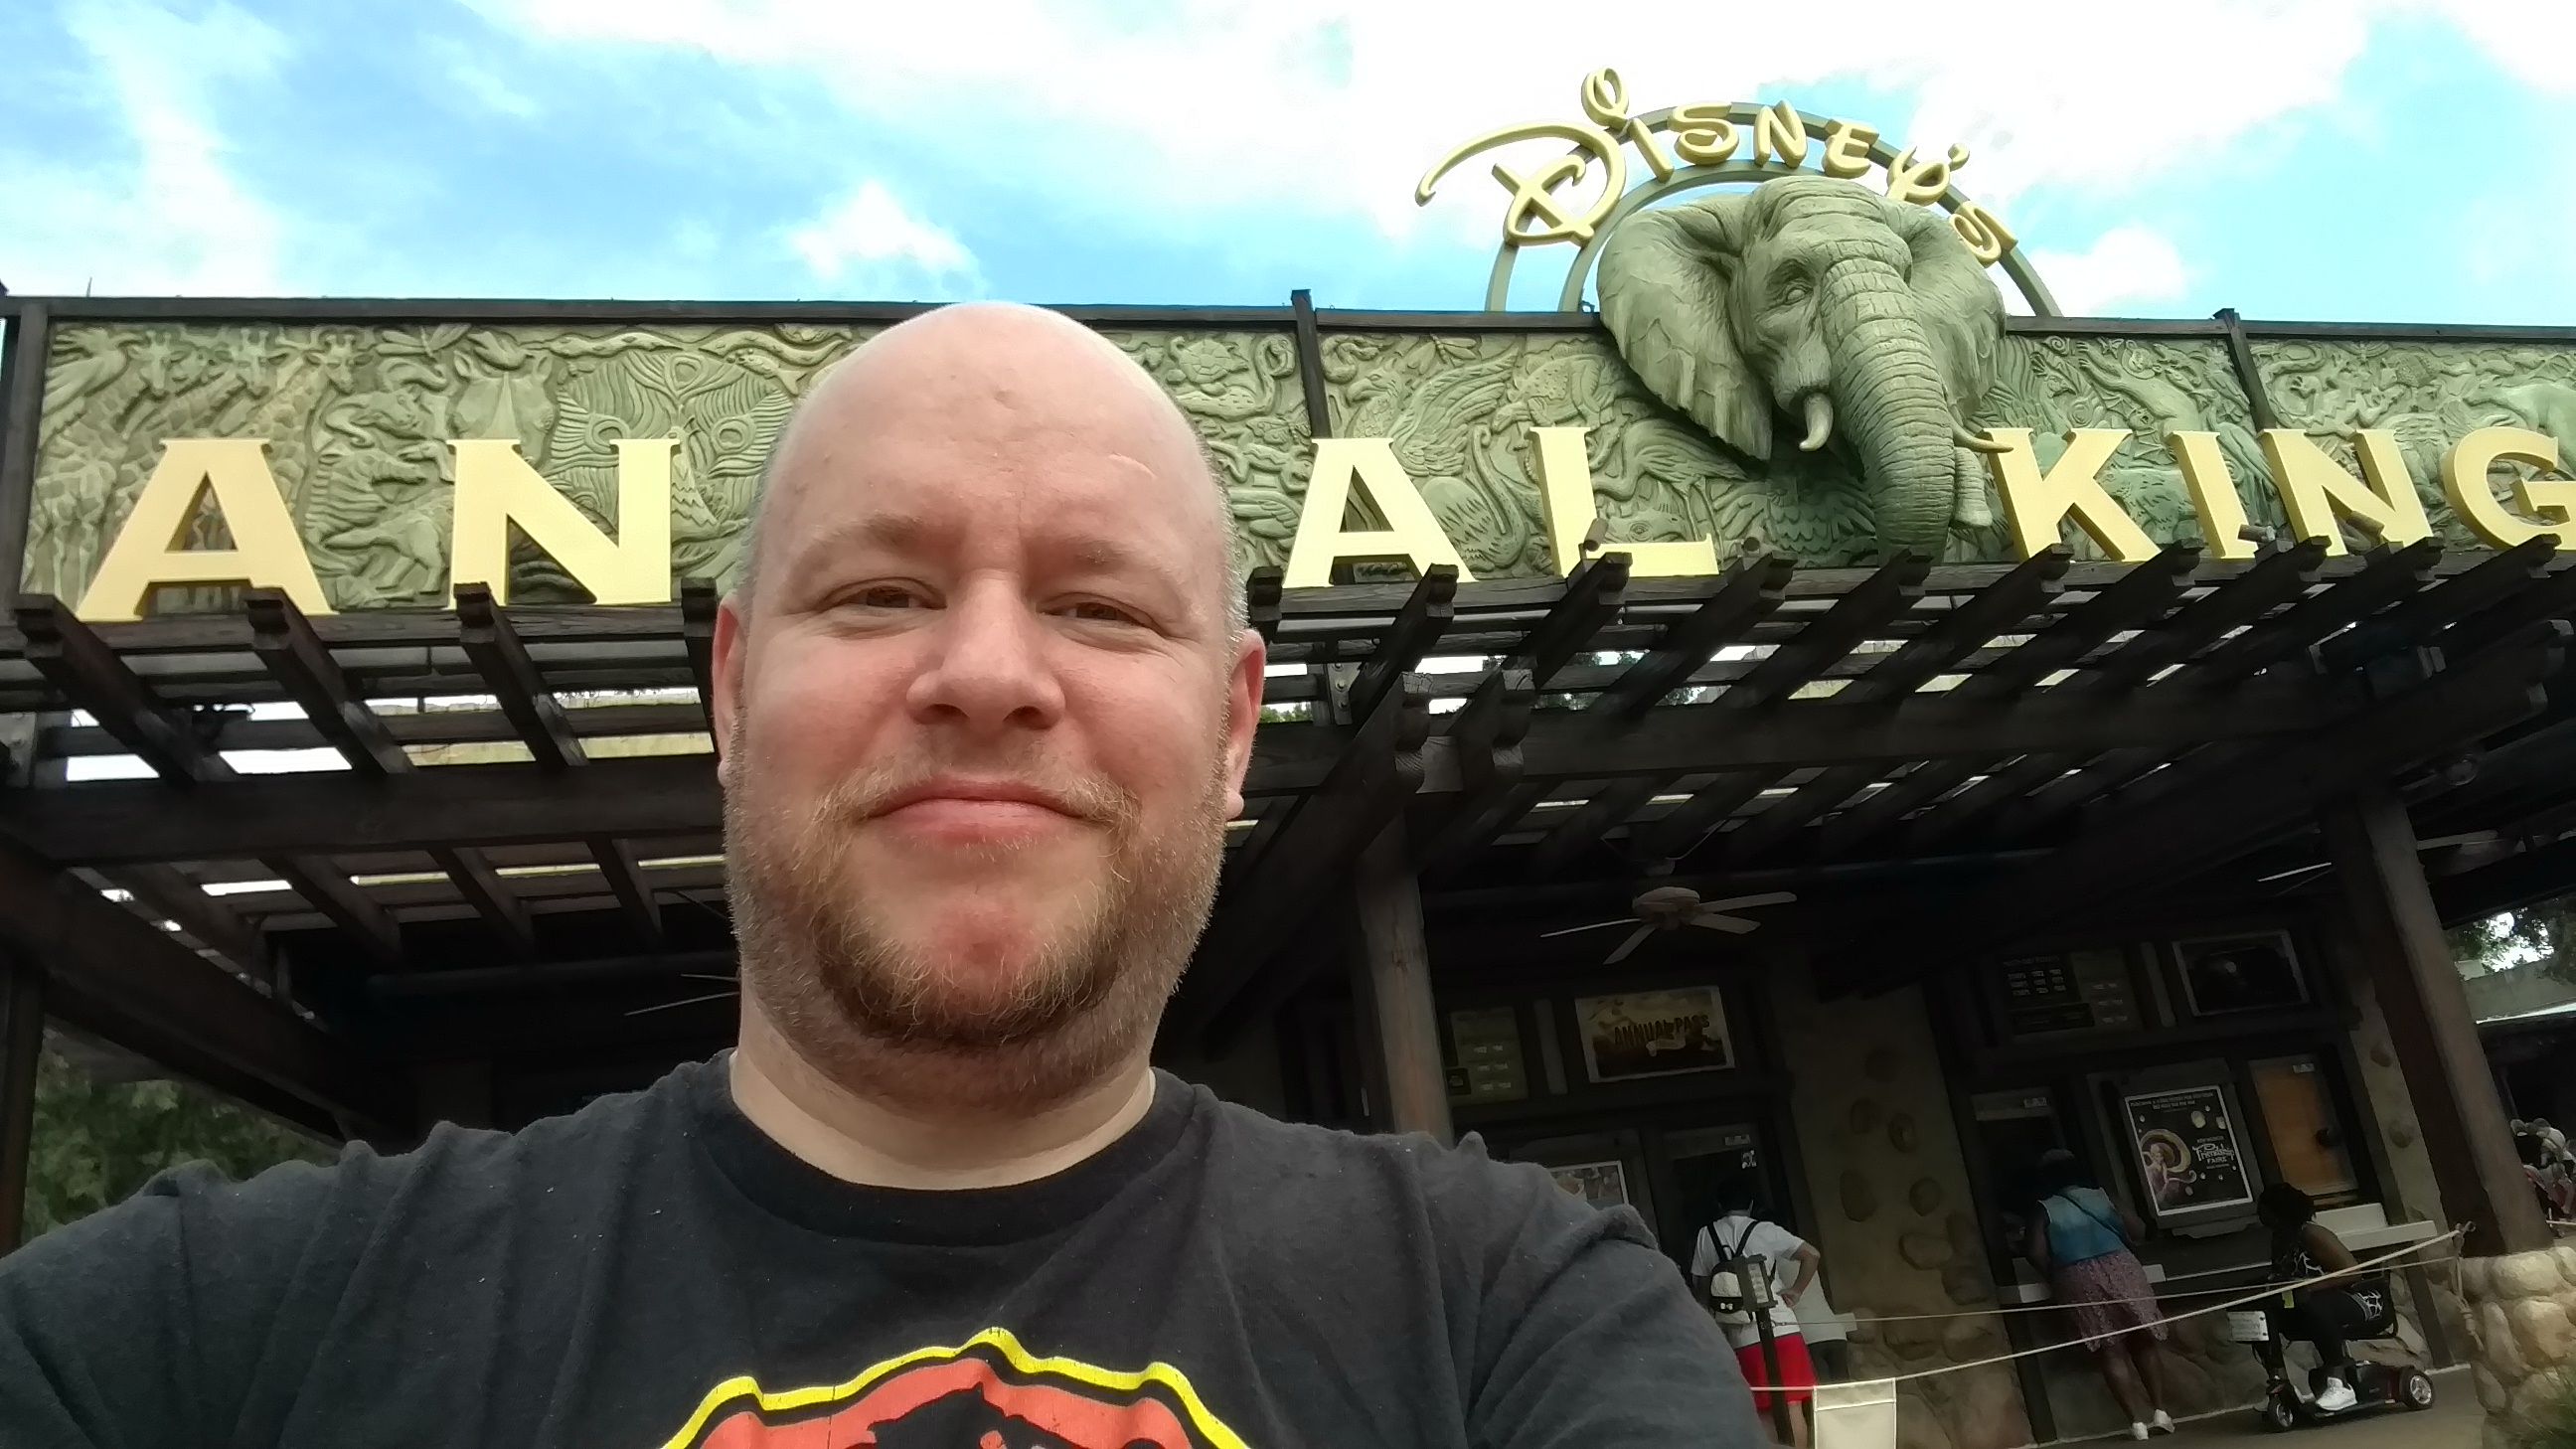 On vacation at Disney World. My wife told me not to.